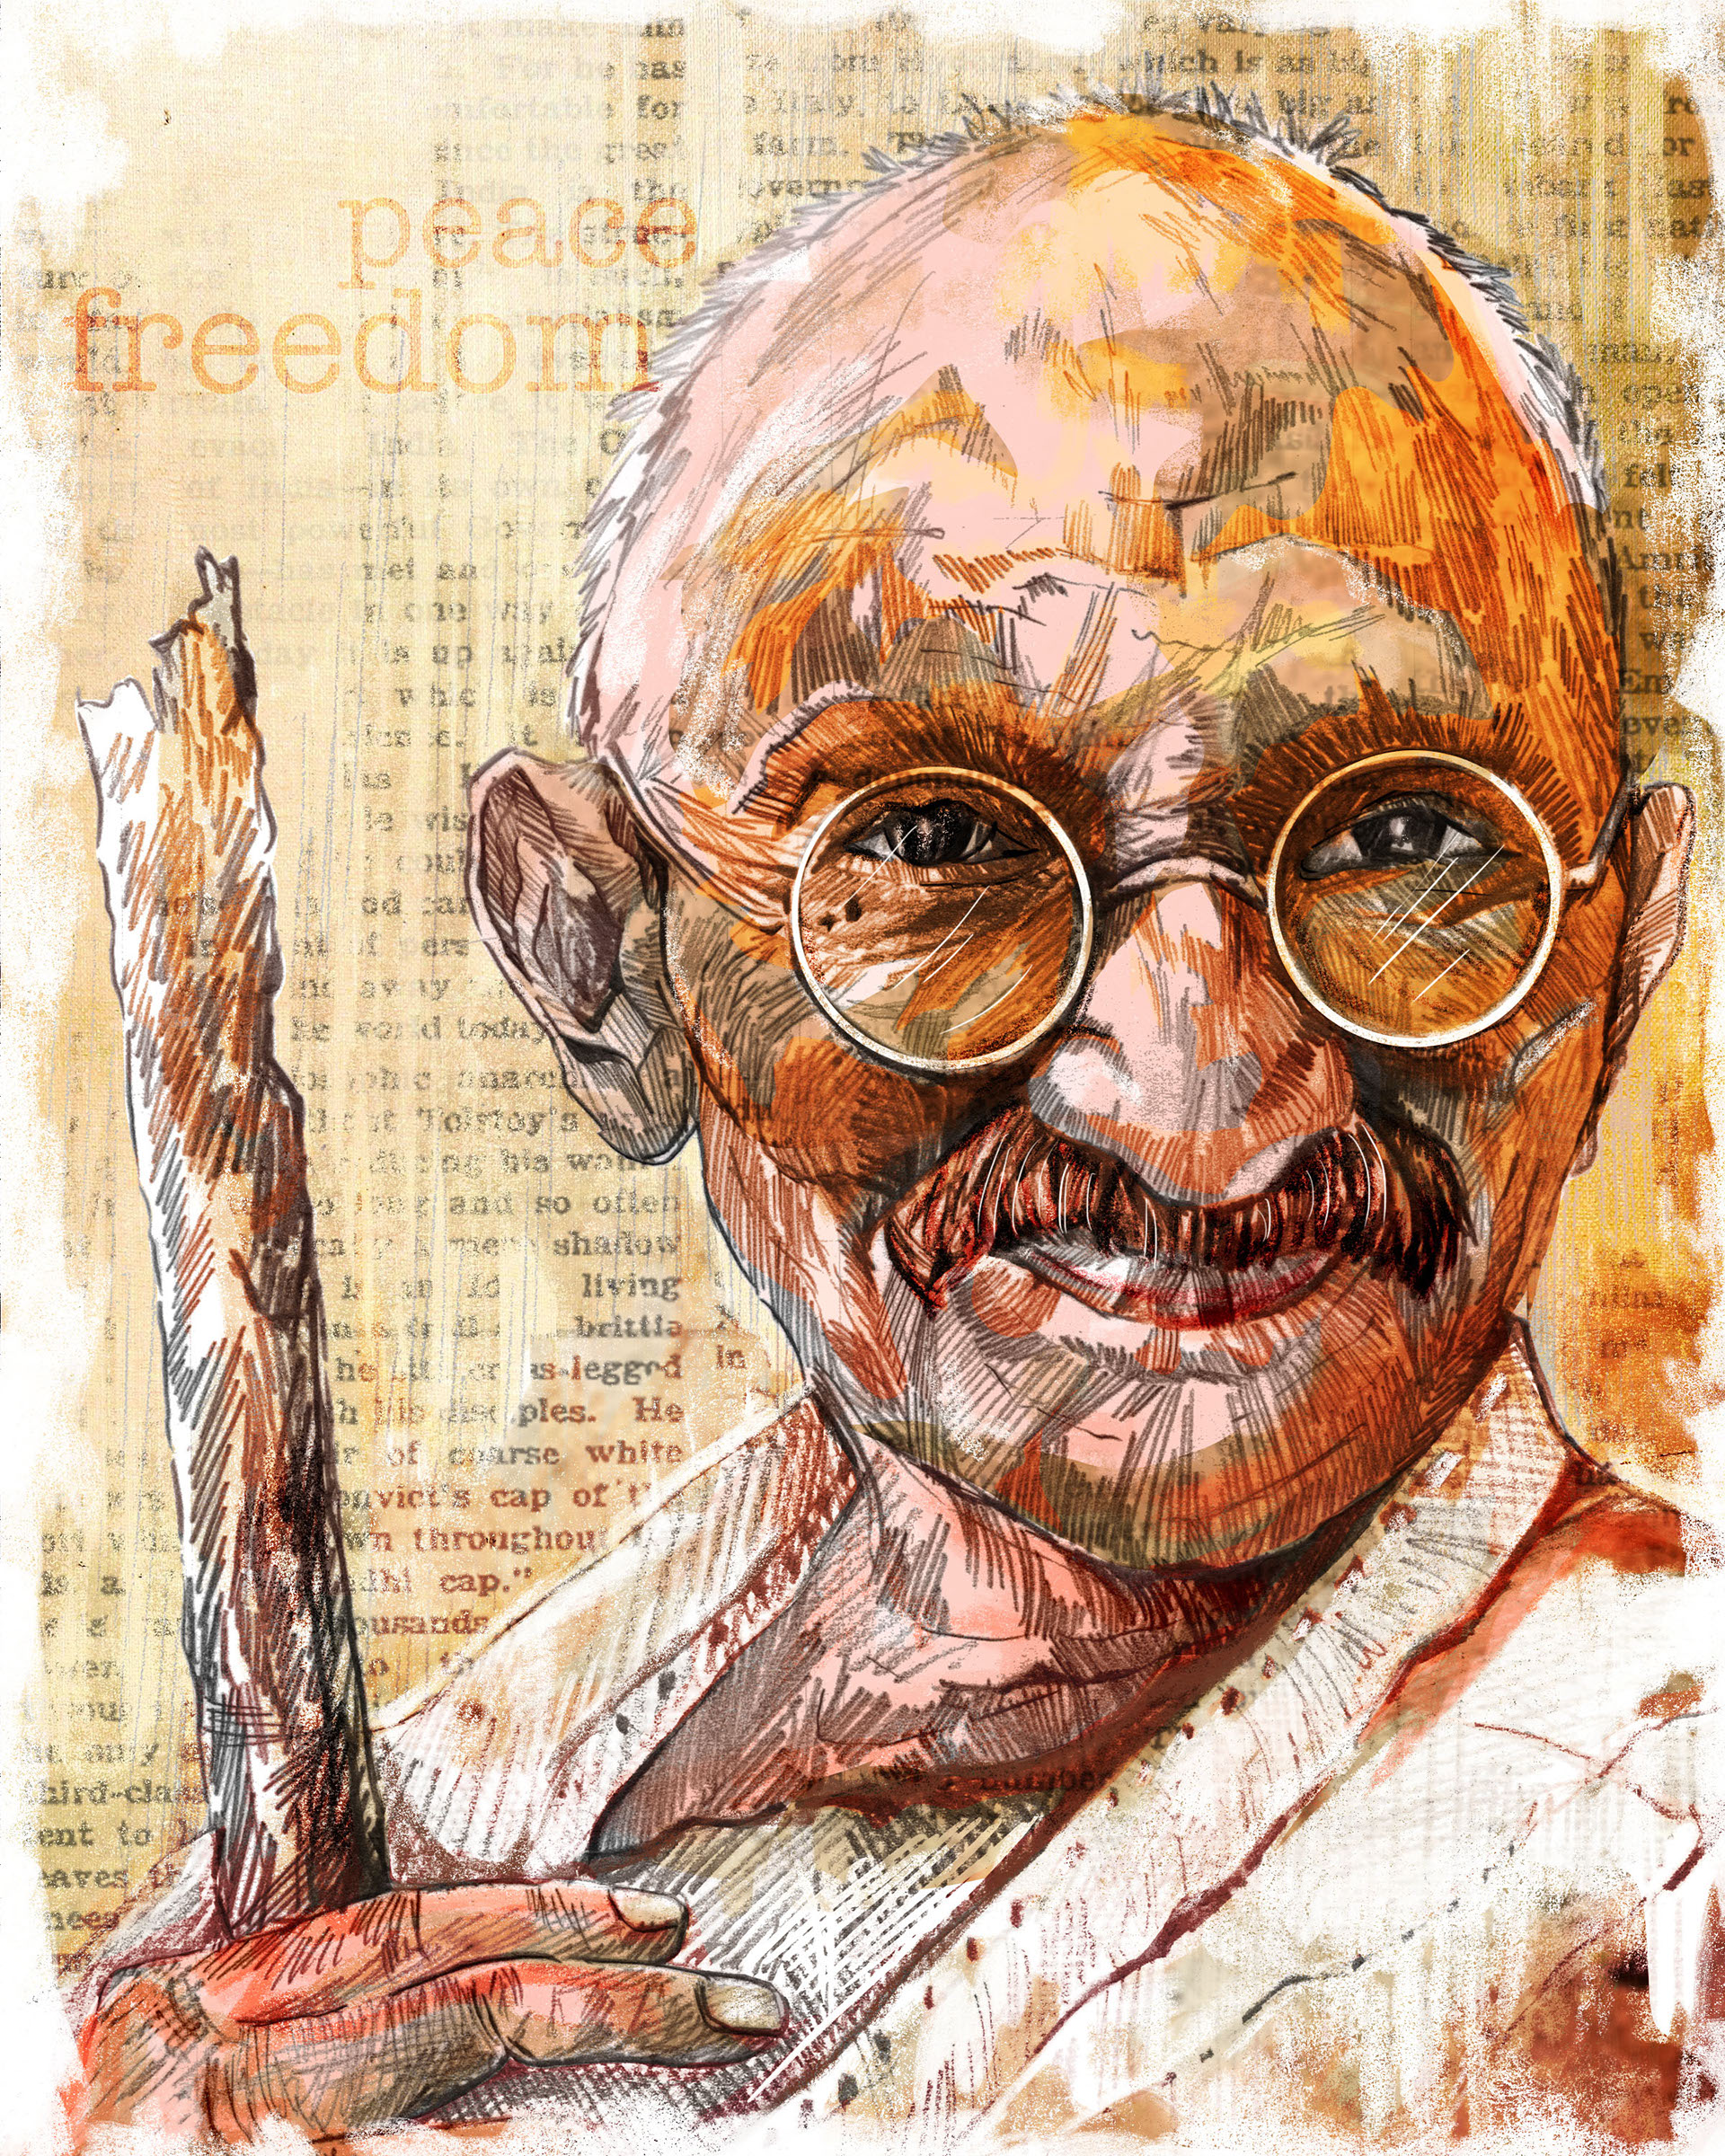 Willima Tell Freedom Fighter Drawing by Reynold Jay - Pixels-saigonsouth.com.vn